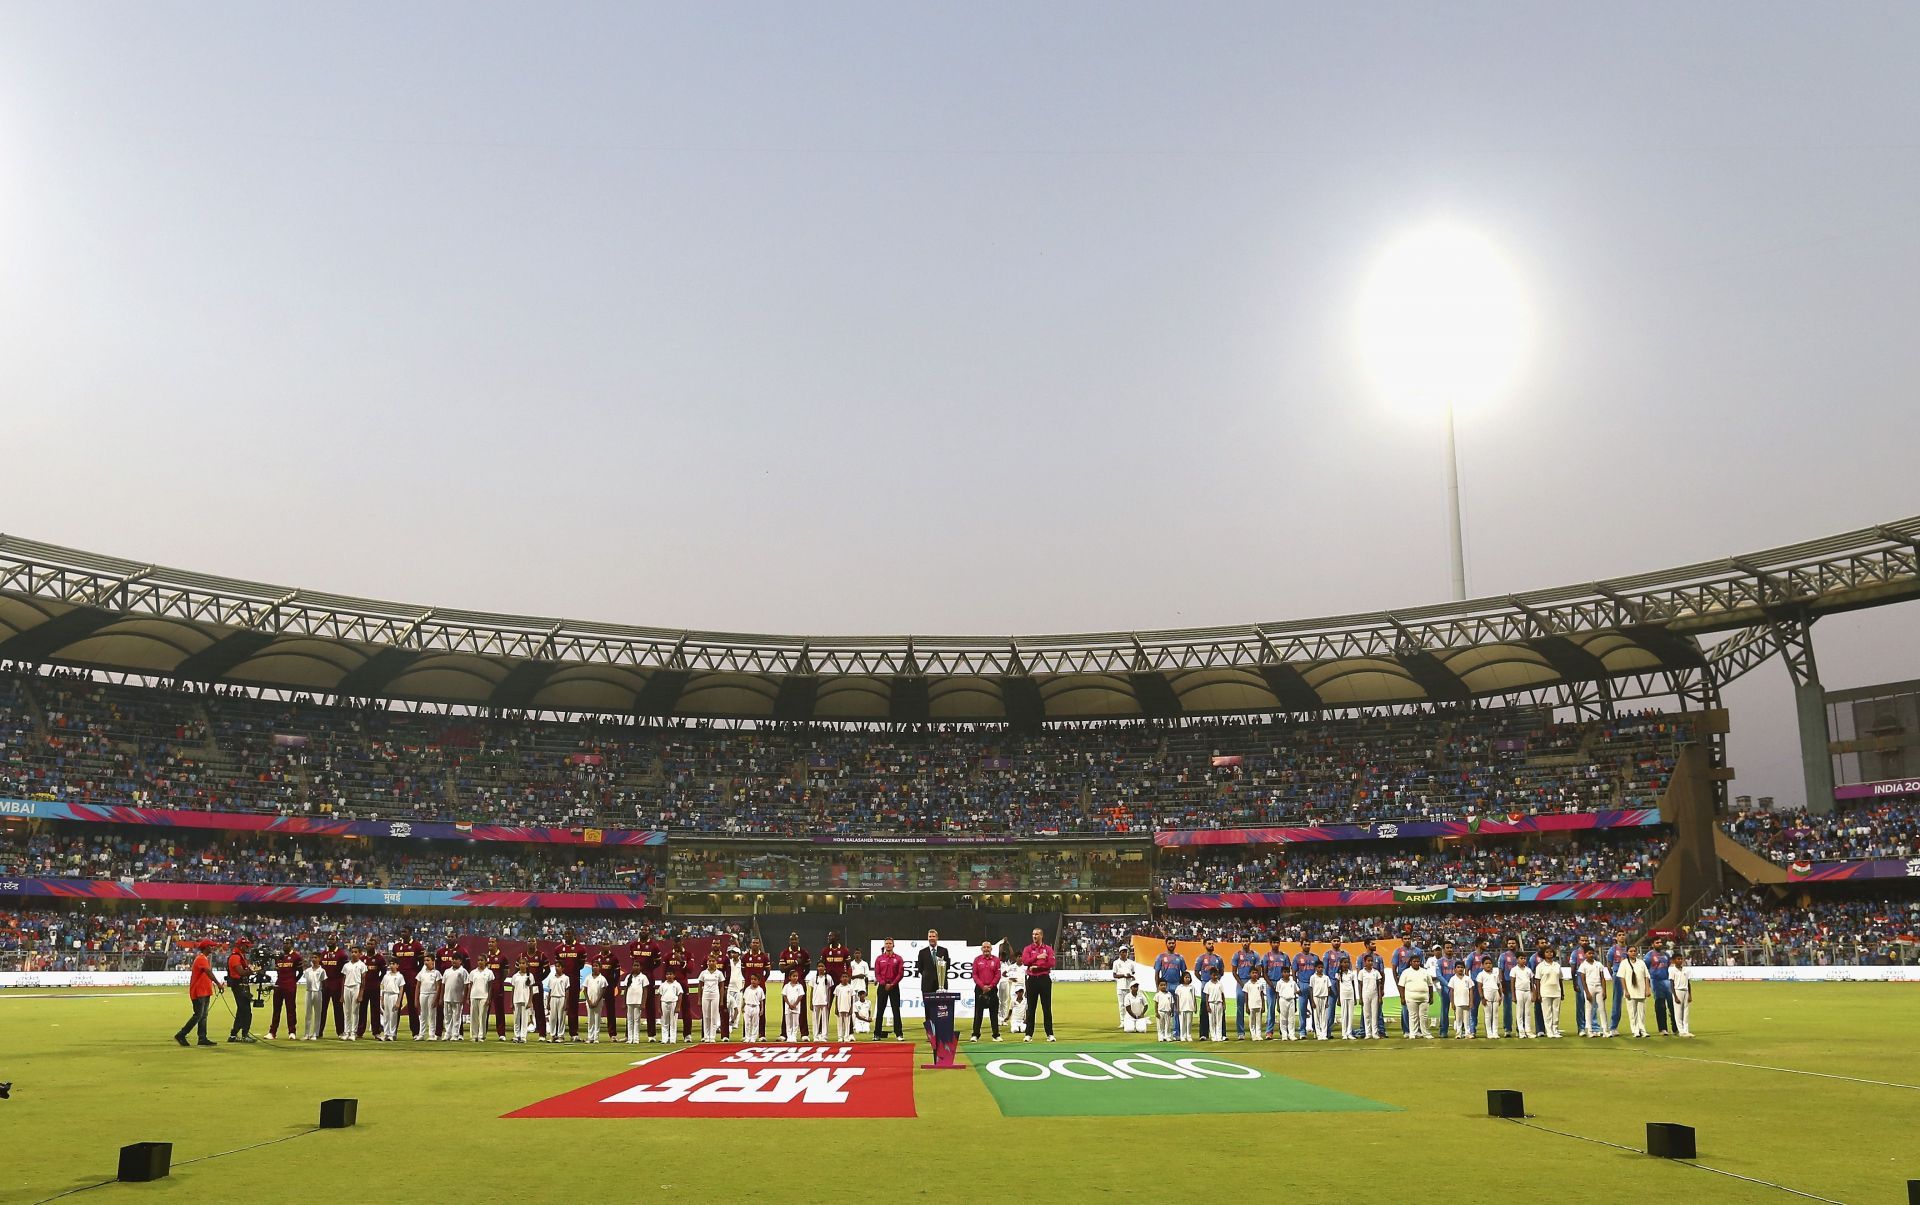 Wankhede Stadium is one of the most iconic in the world